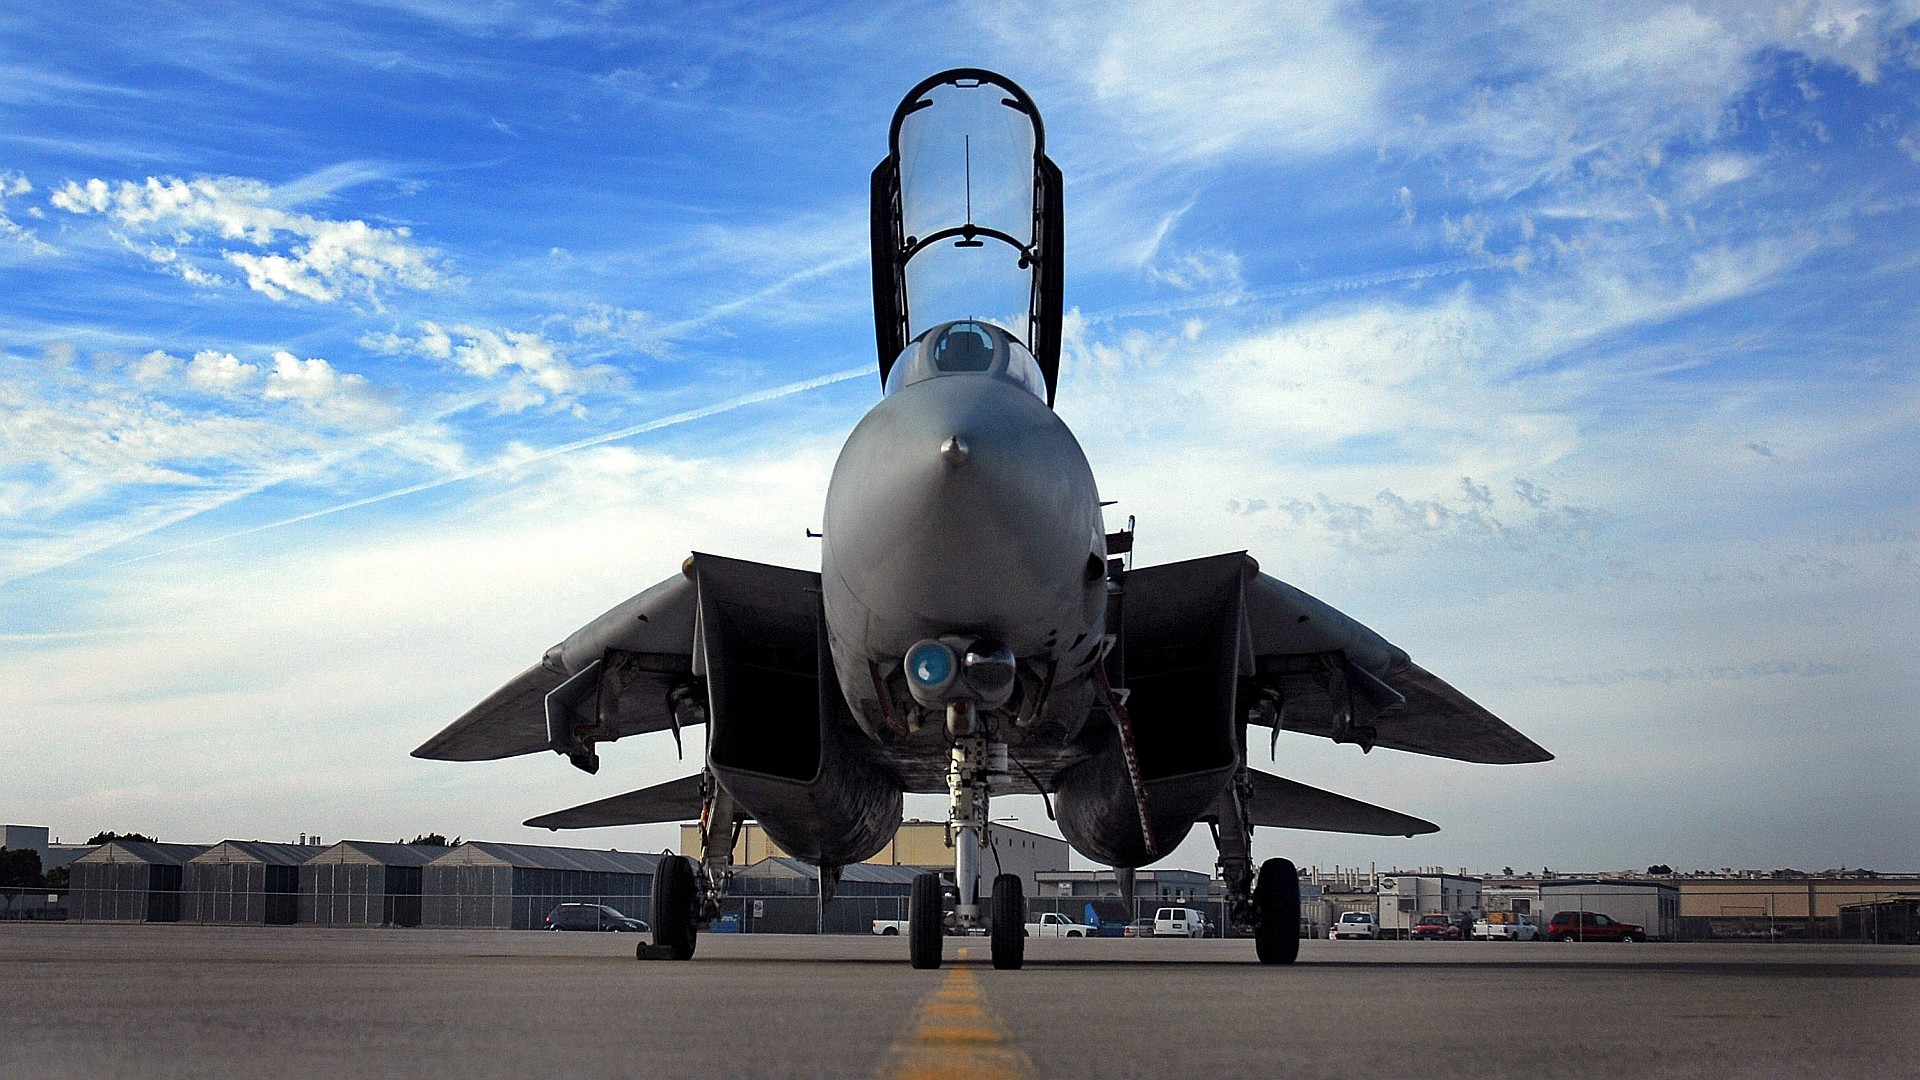 1920x1080  HD wallpaper of a F-14 Tomcat on the tarmac. The widescreen  version (2560x1600) of this #wallpaper can be found at  http://i.imgur.com/cK716ar.jpg ...